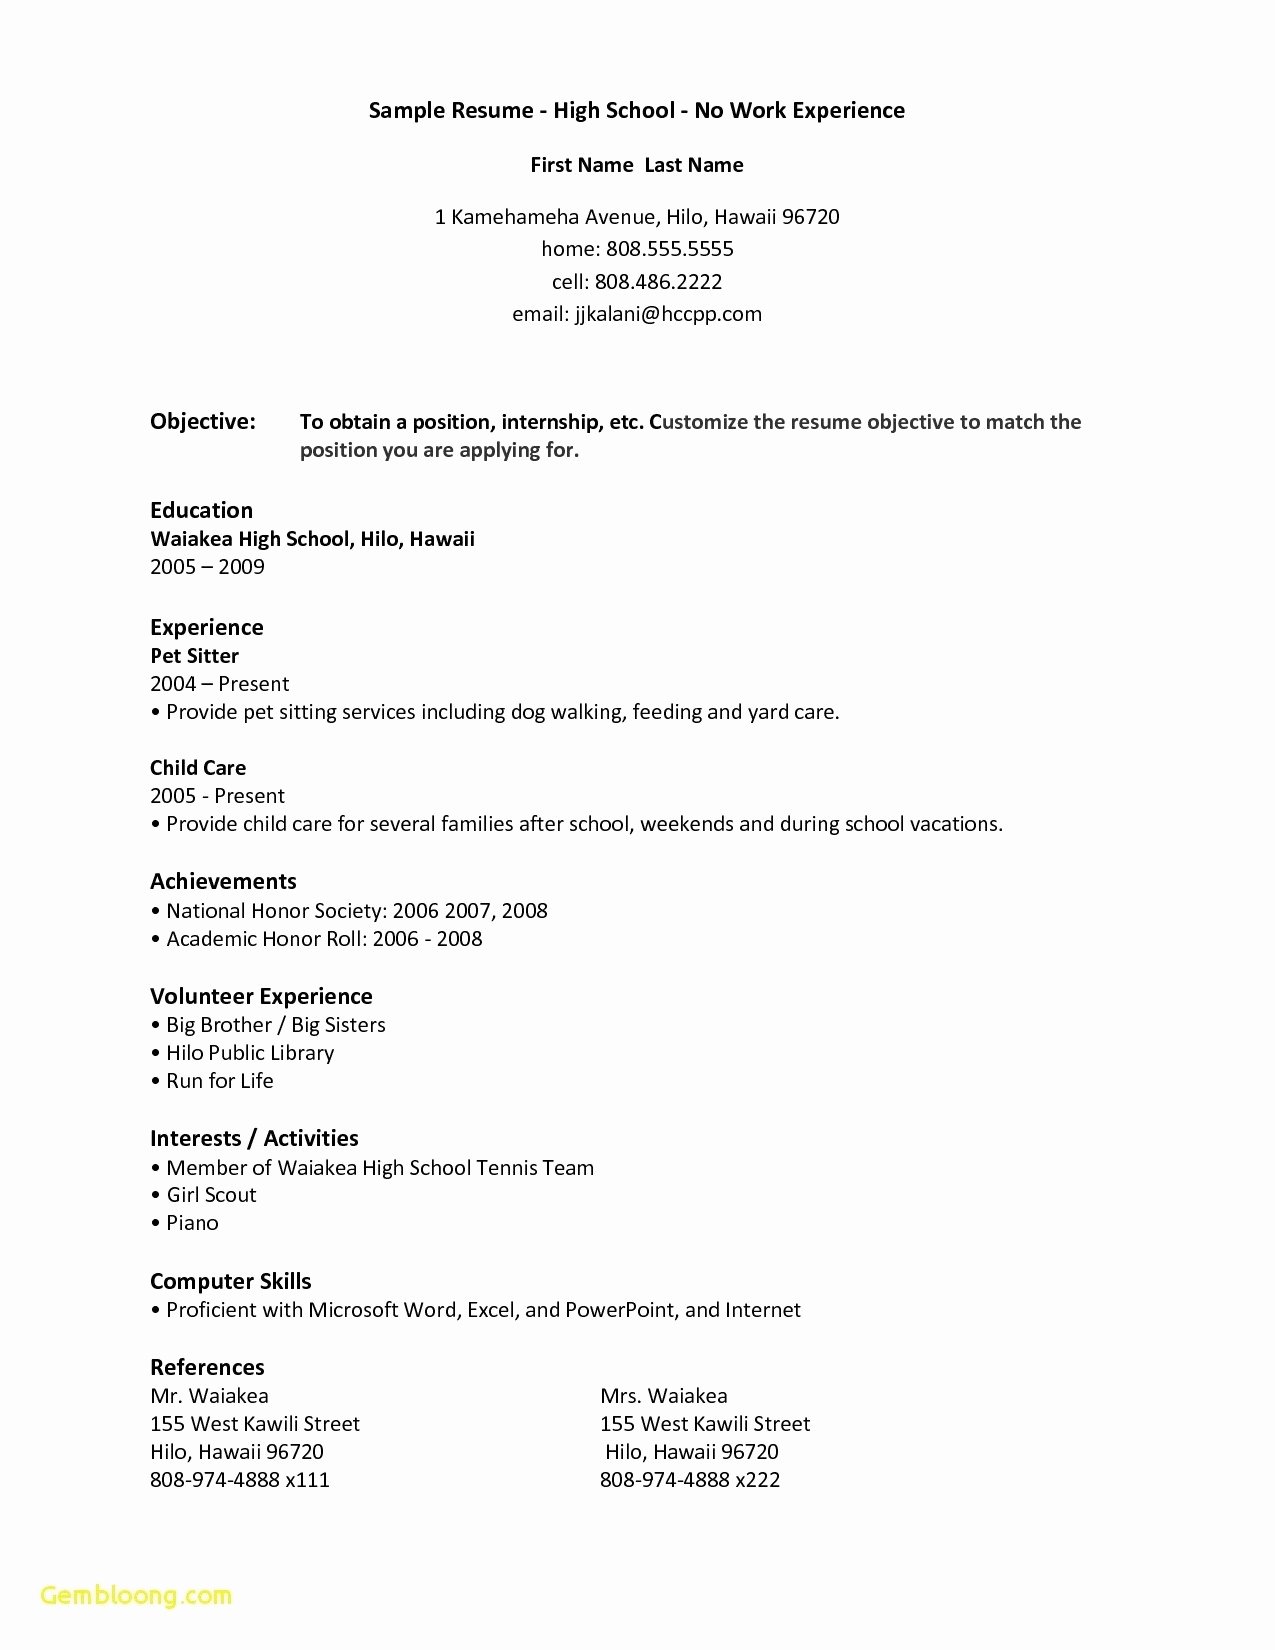 First Time Job Resume Best Of 10 Resume for First Job Out College